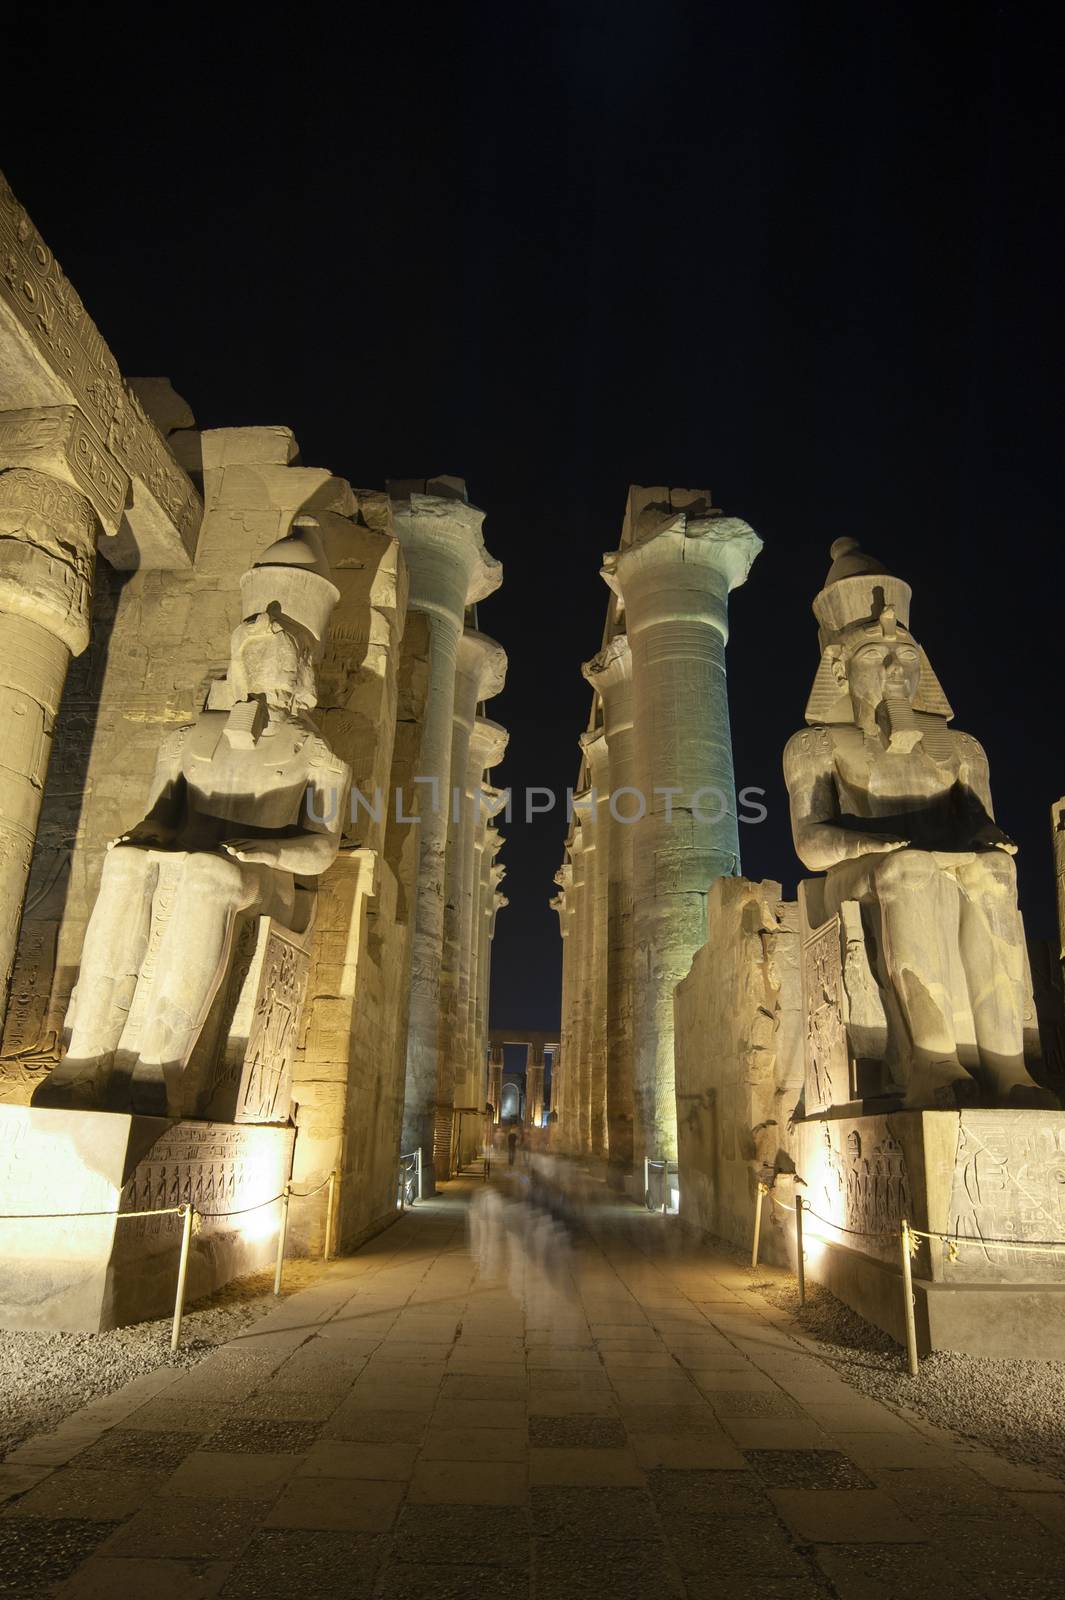 Statues and columns in hypostyle hall at Luxor Temple during nig by paulvinten